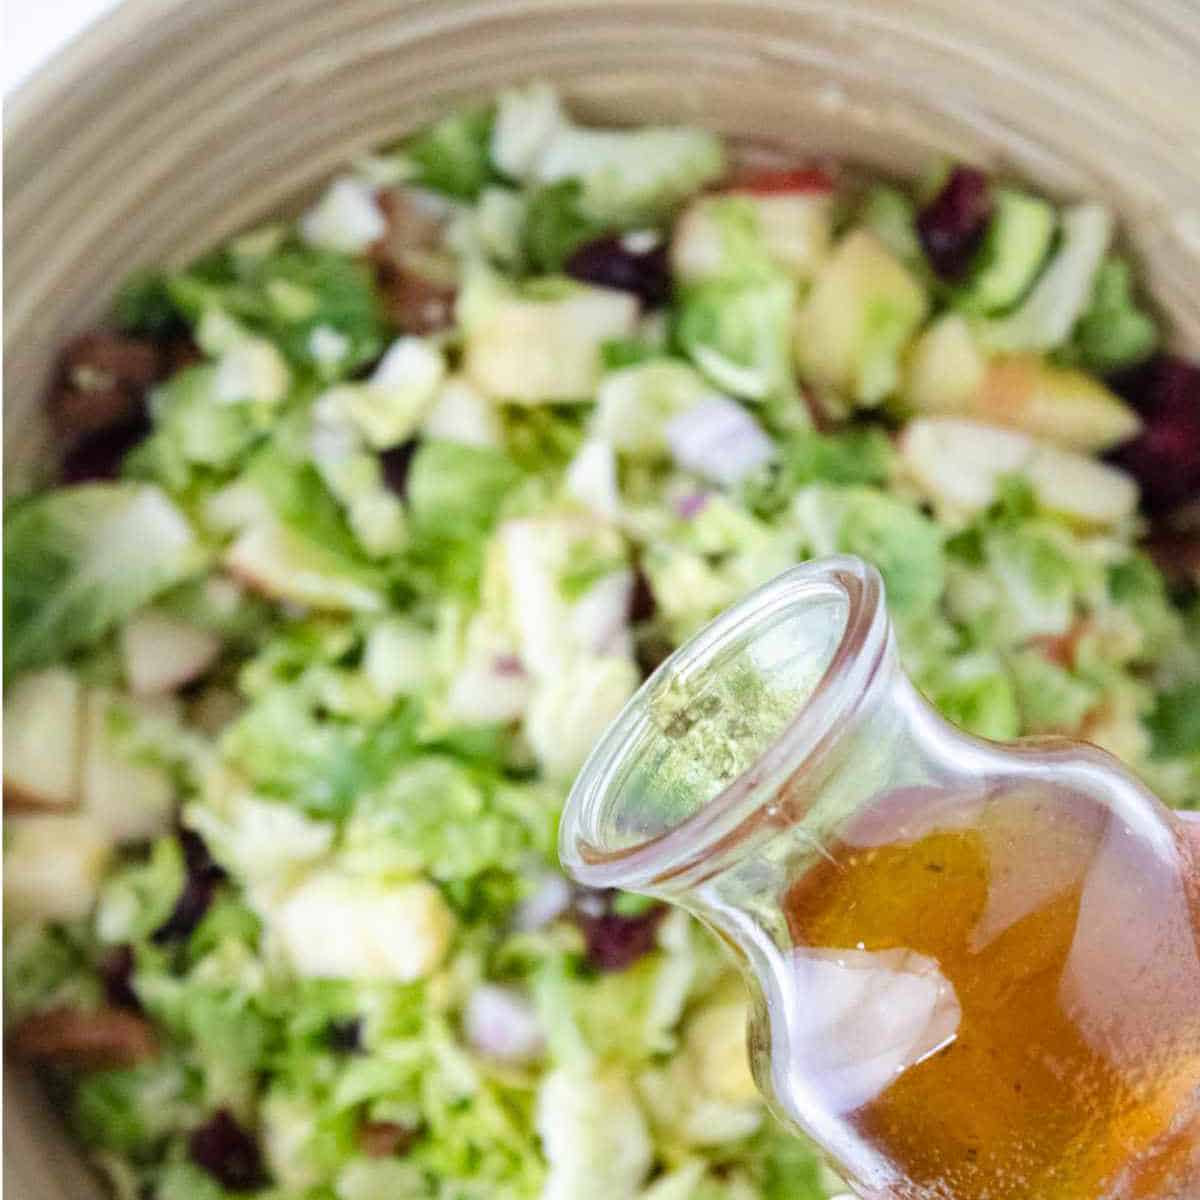 pouring salad dressing on a salad.